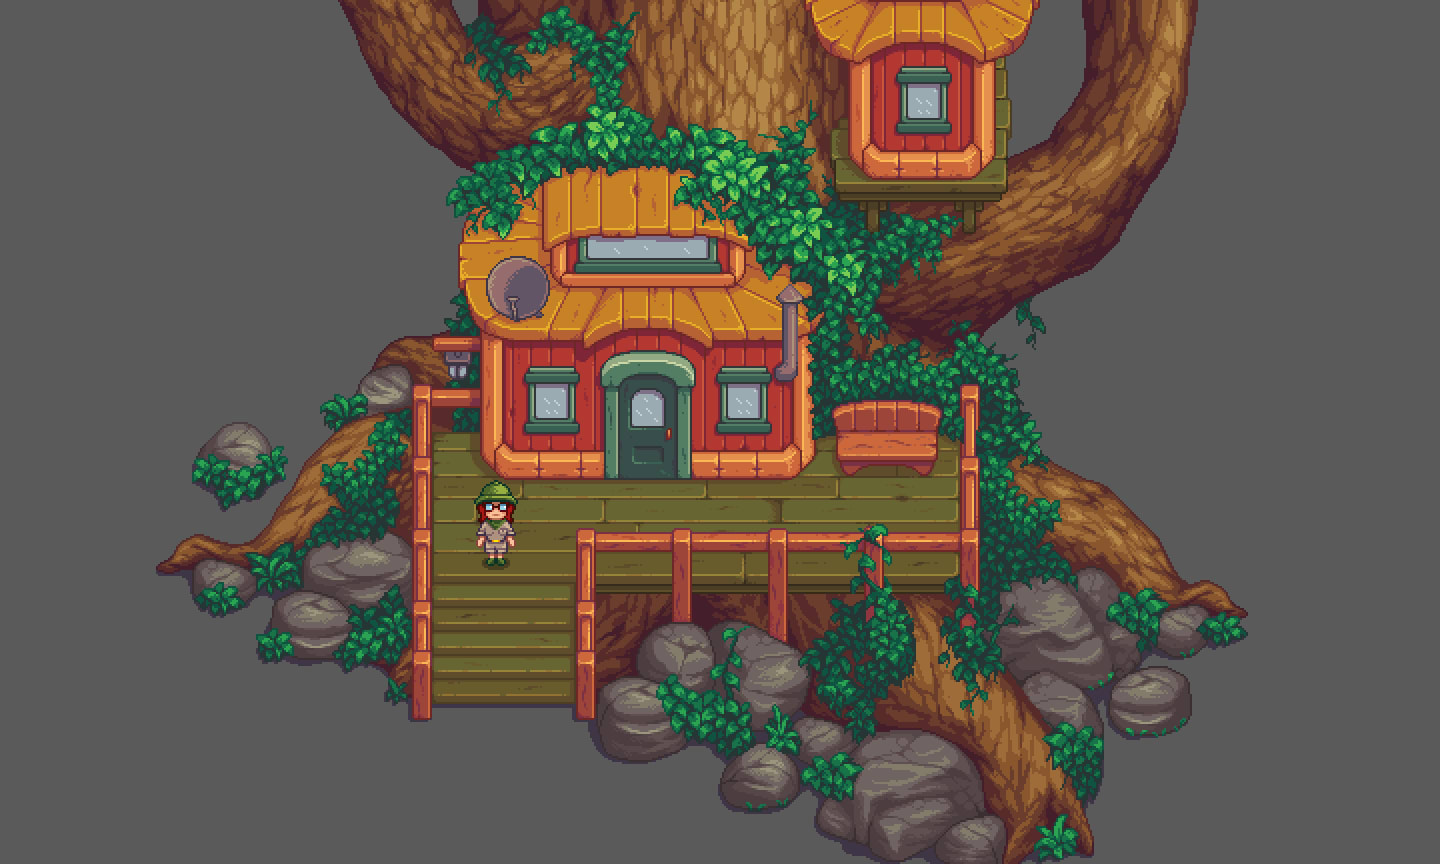 Treehouse for the game! We recorded the entire process of creating content from scratch on our YouTube channel!